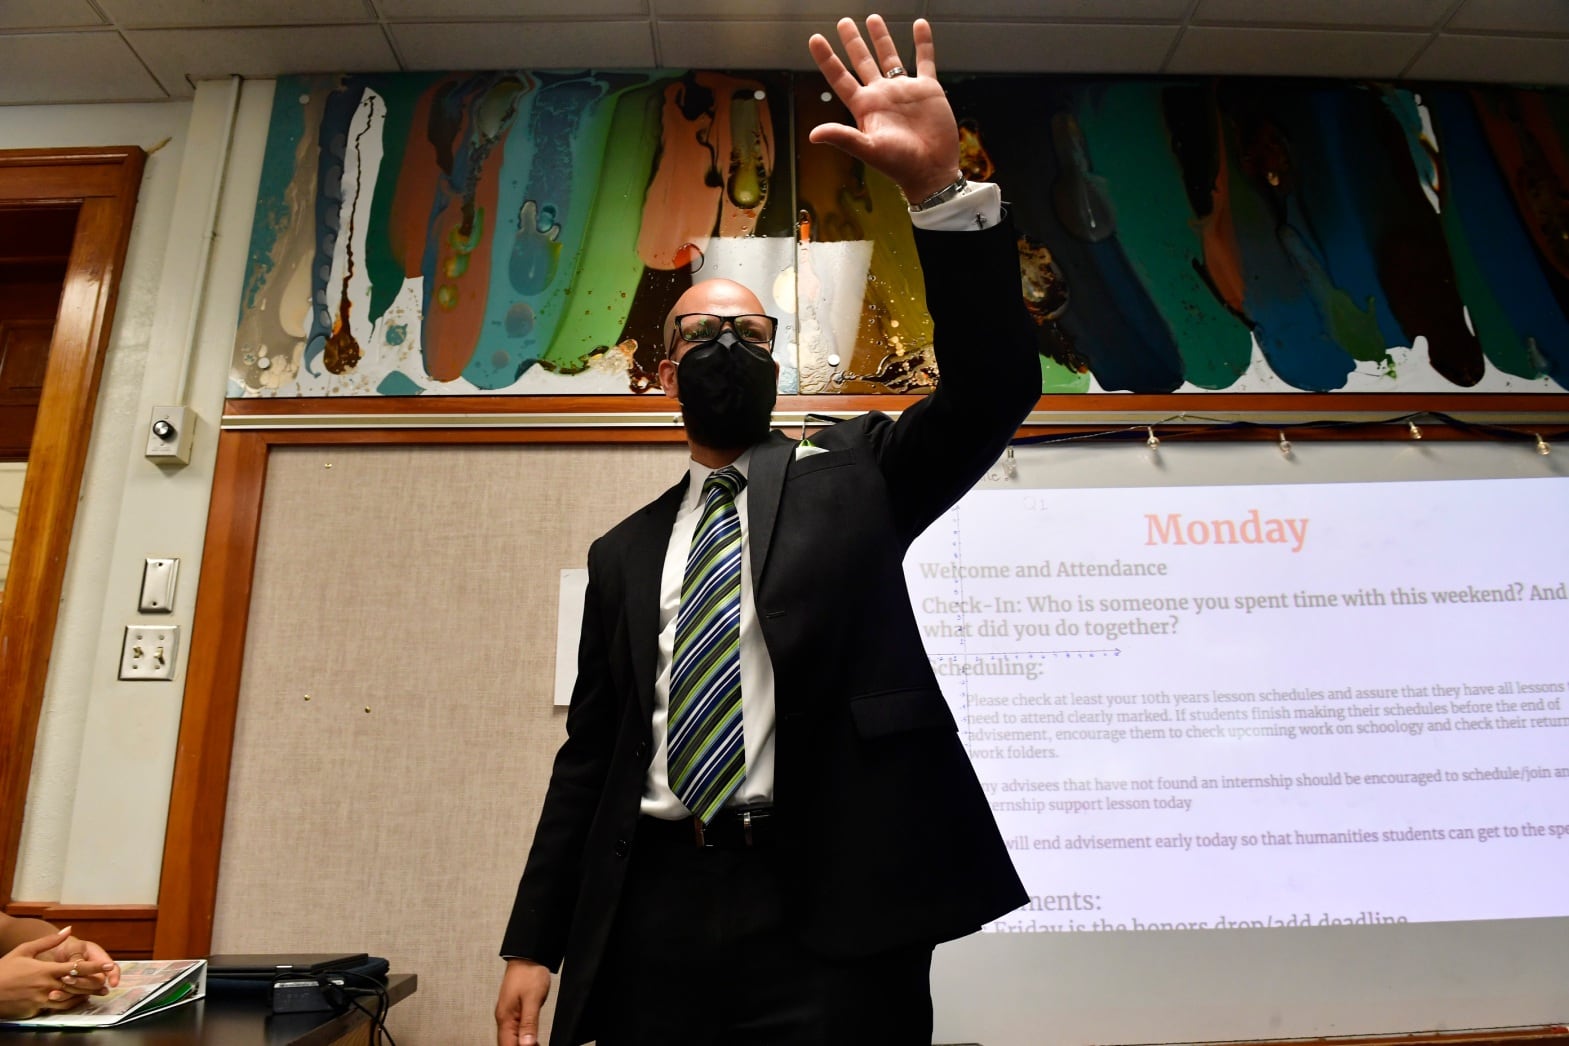 A man wearing a suit and tie and face mask stands in a classroom, waving at students.